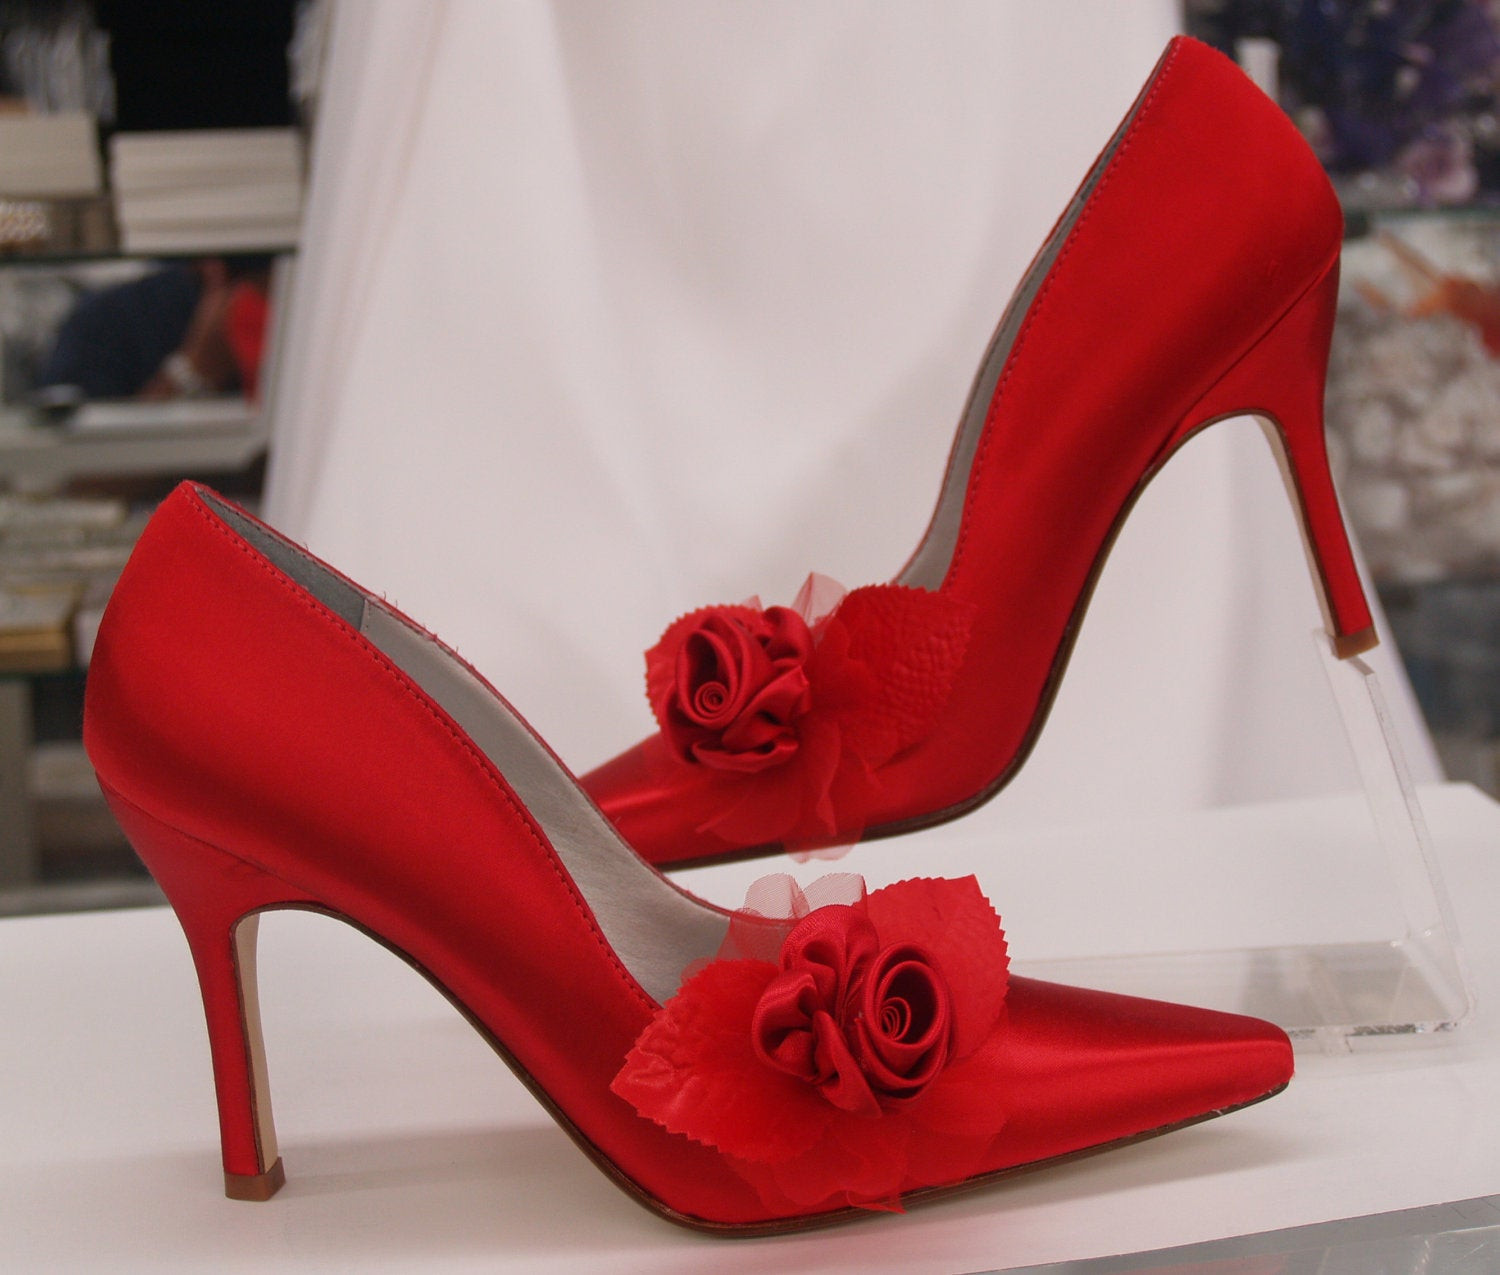 Red Wedding Shoes For Bride
 Red Satin Rose Wedding Shoes y Heels heel shoes 3